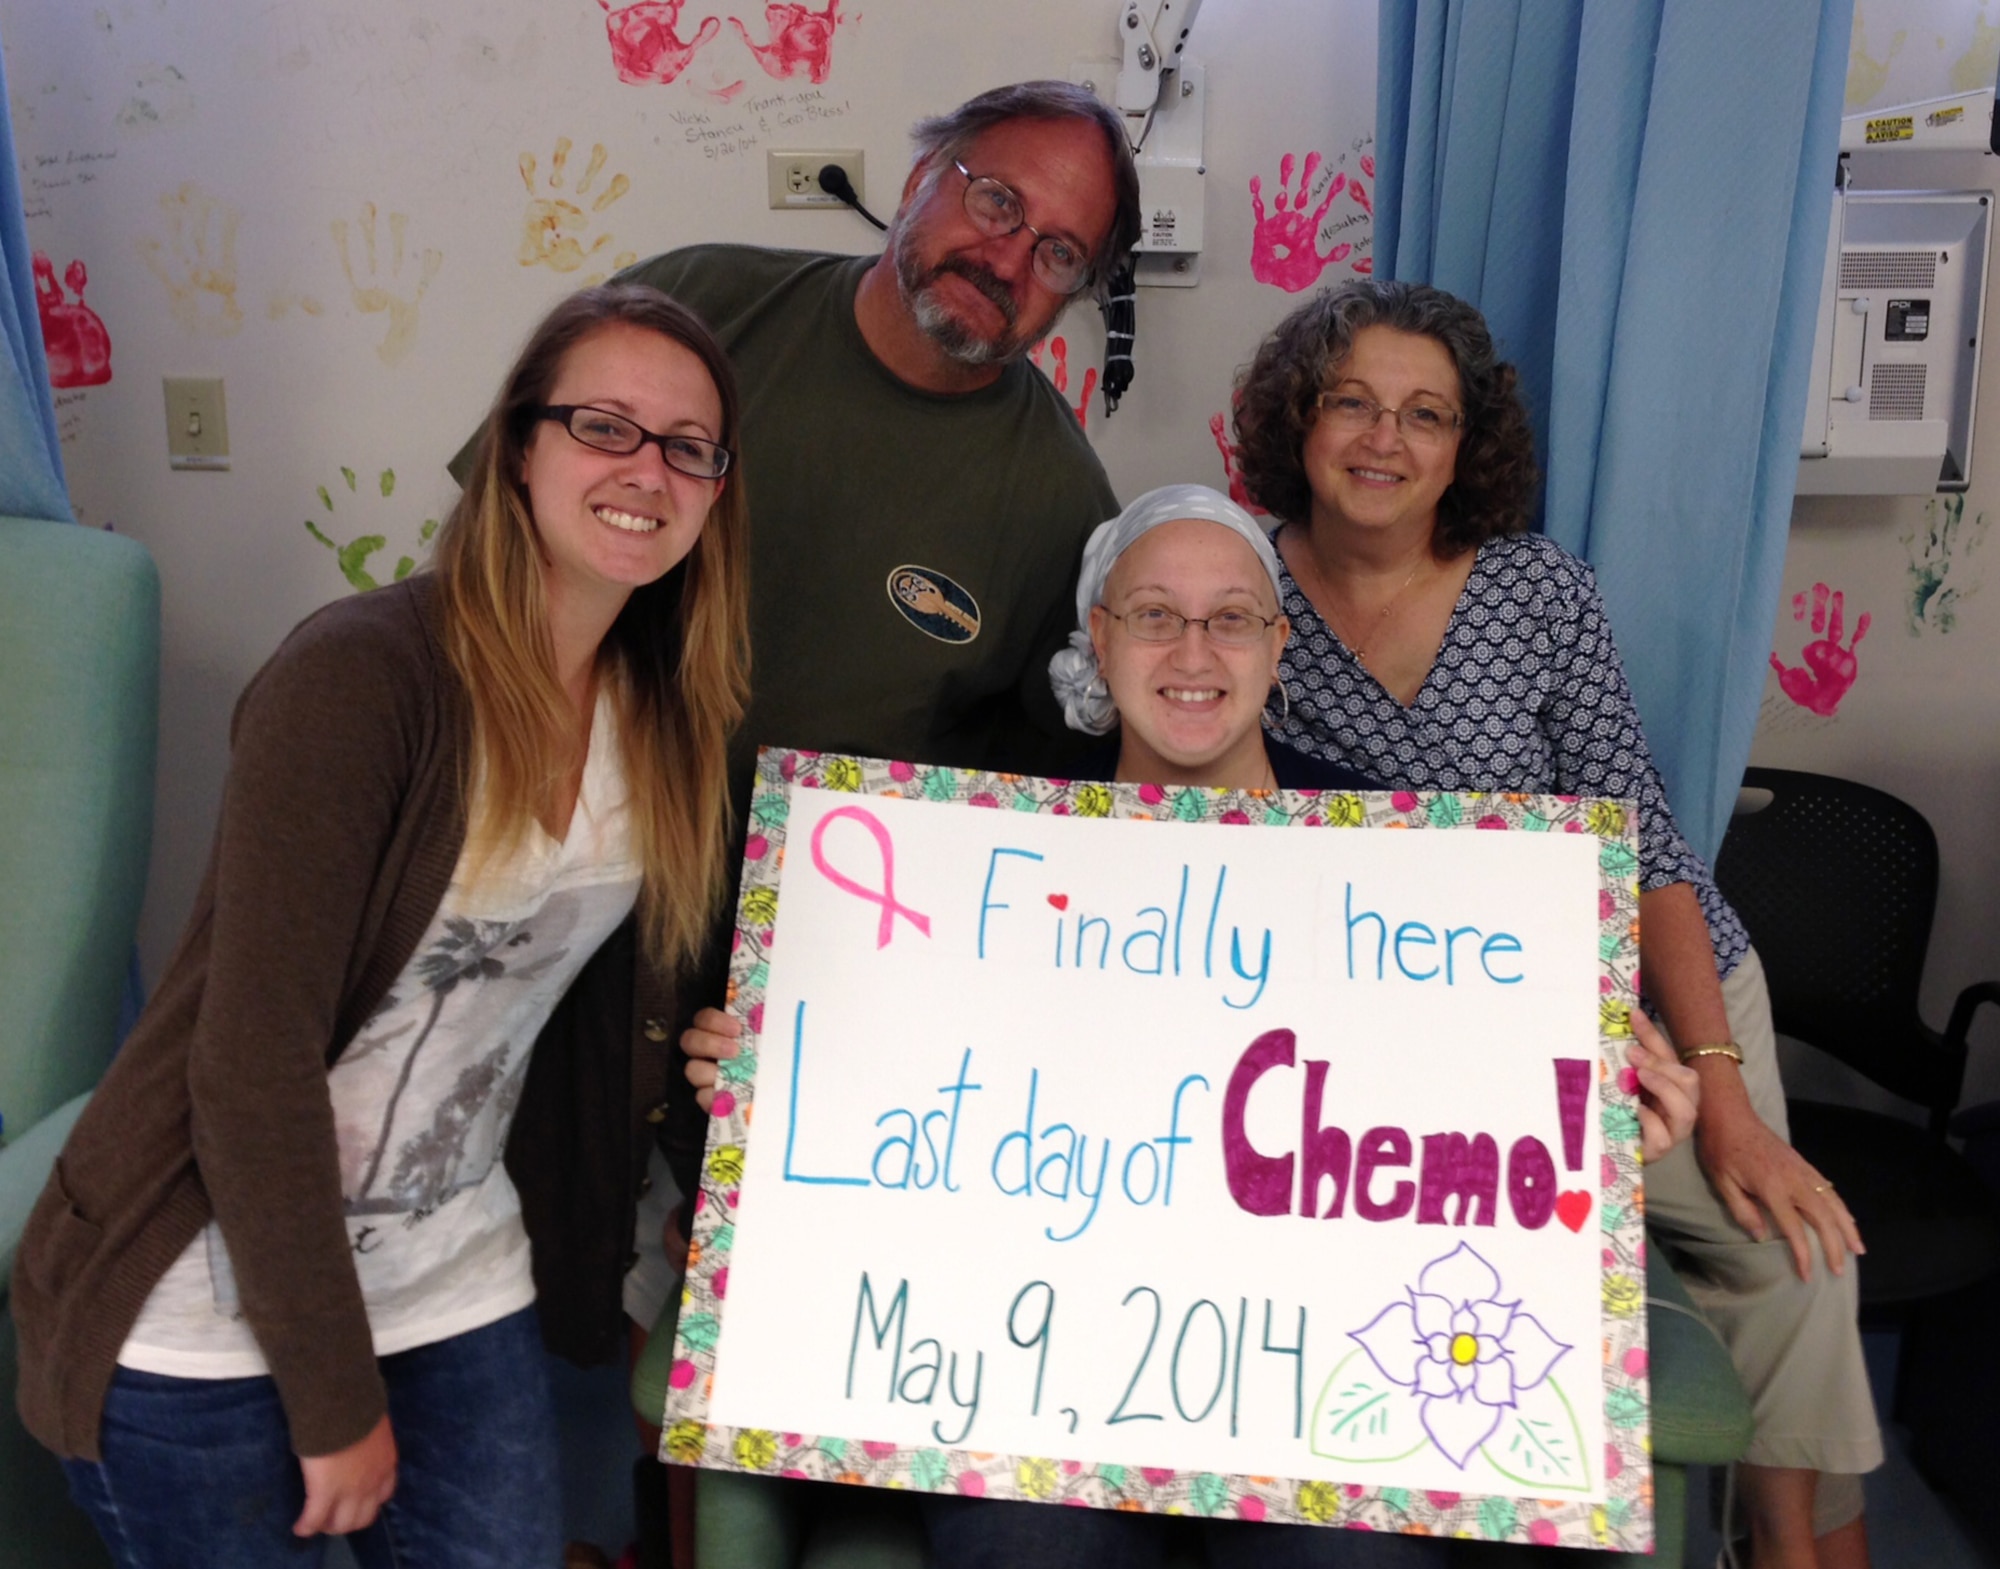 Staff Sgt. Amanda Dick celebrates her last chemotherapy treatment with her family, May 9, 2014, at Tripler Army Medical Center, Hawaii. According to the American Cancer Society, about one in eight women in the U.S. are diagnosed with breast cancer. (Courtesy photo)